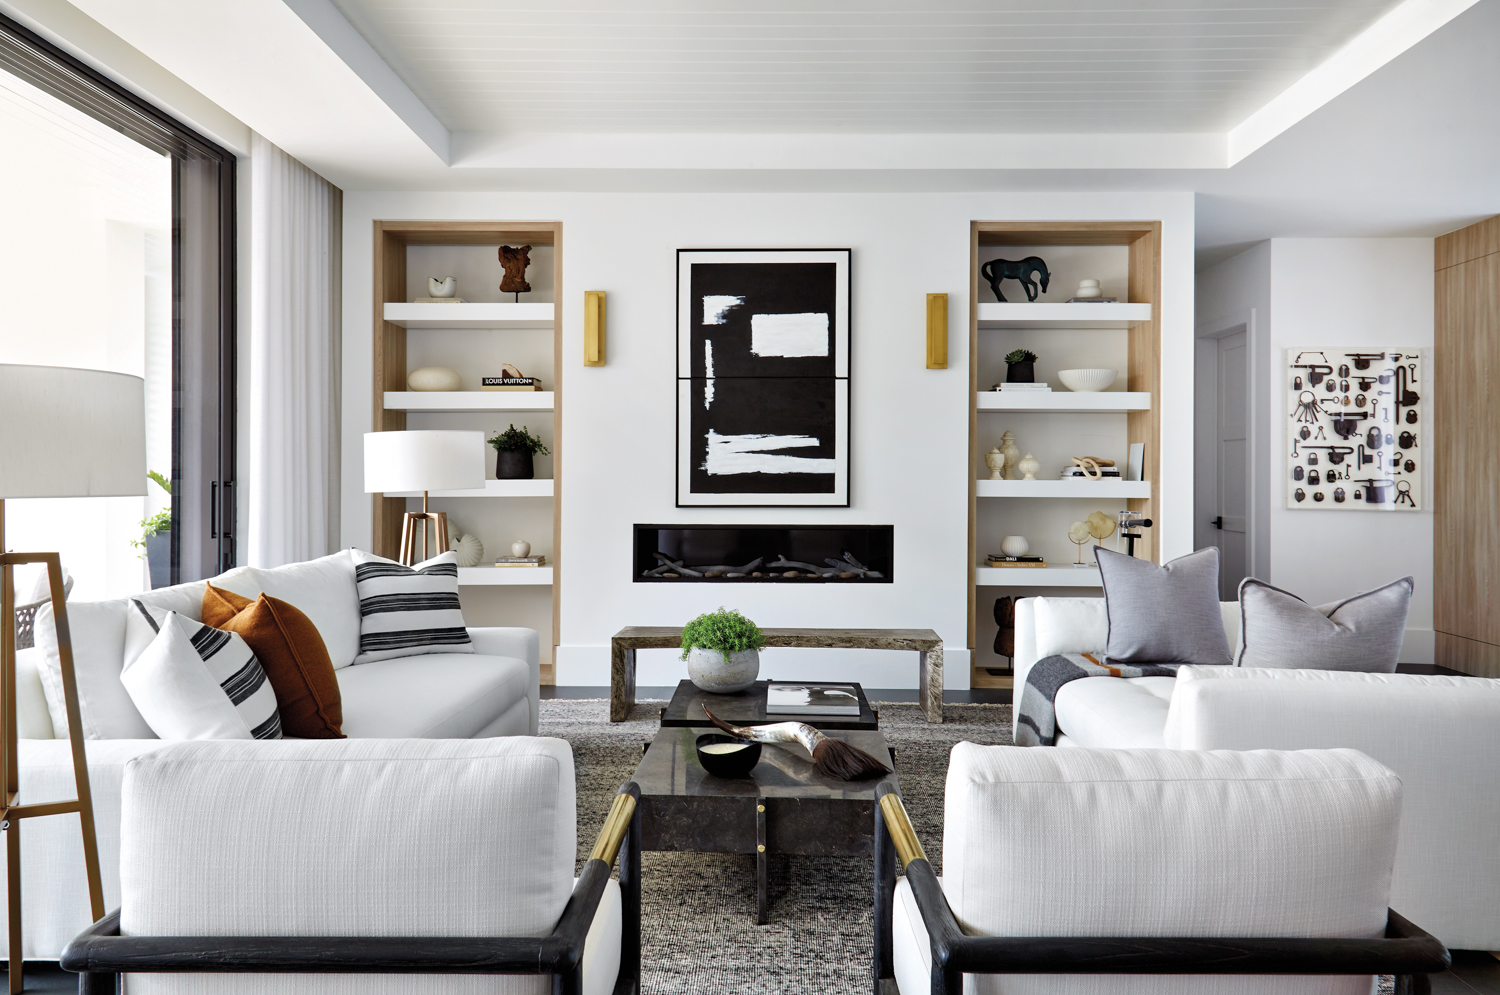 living area with white sofas and walls, black artwork and two built-ins